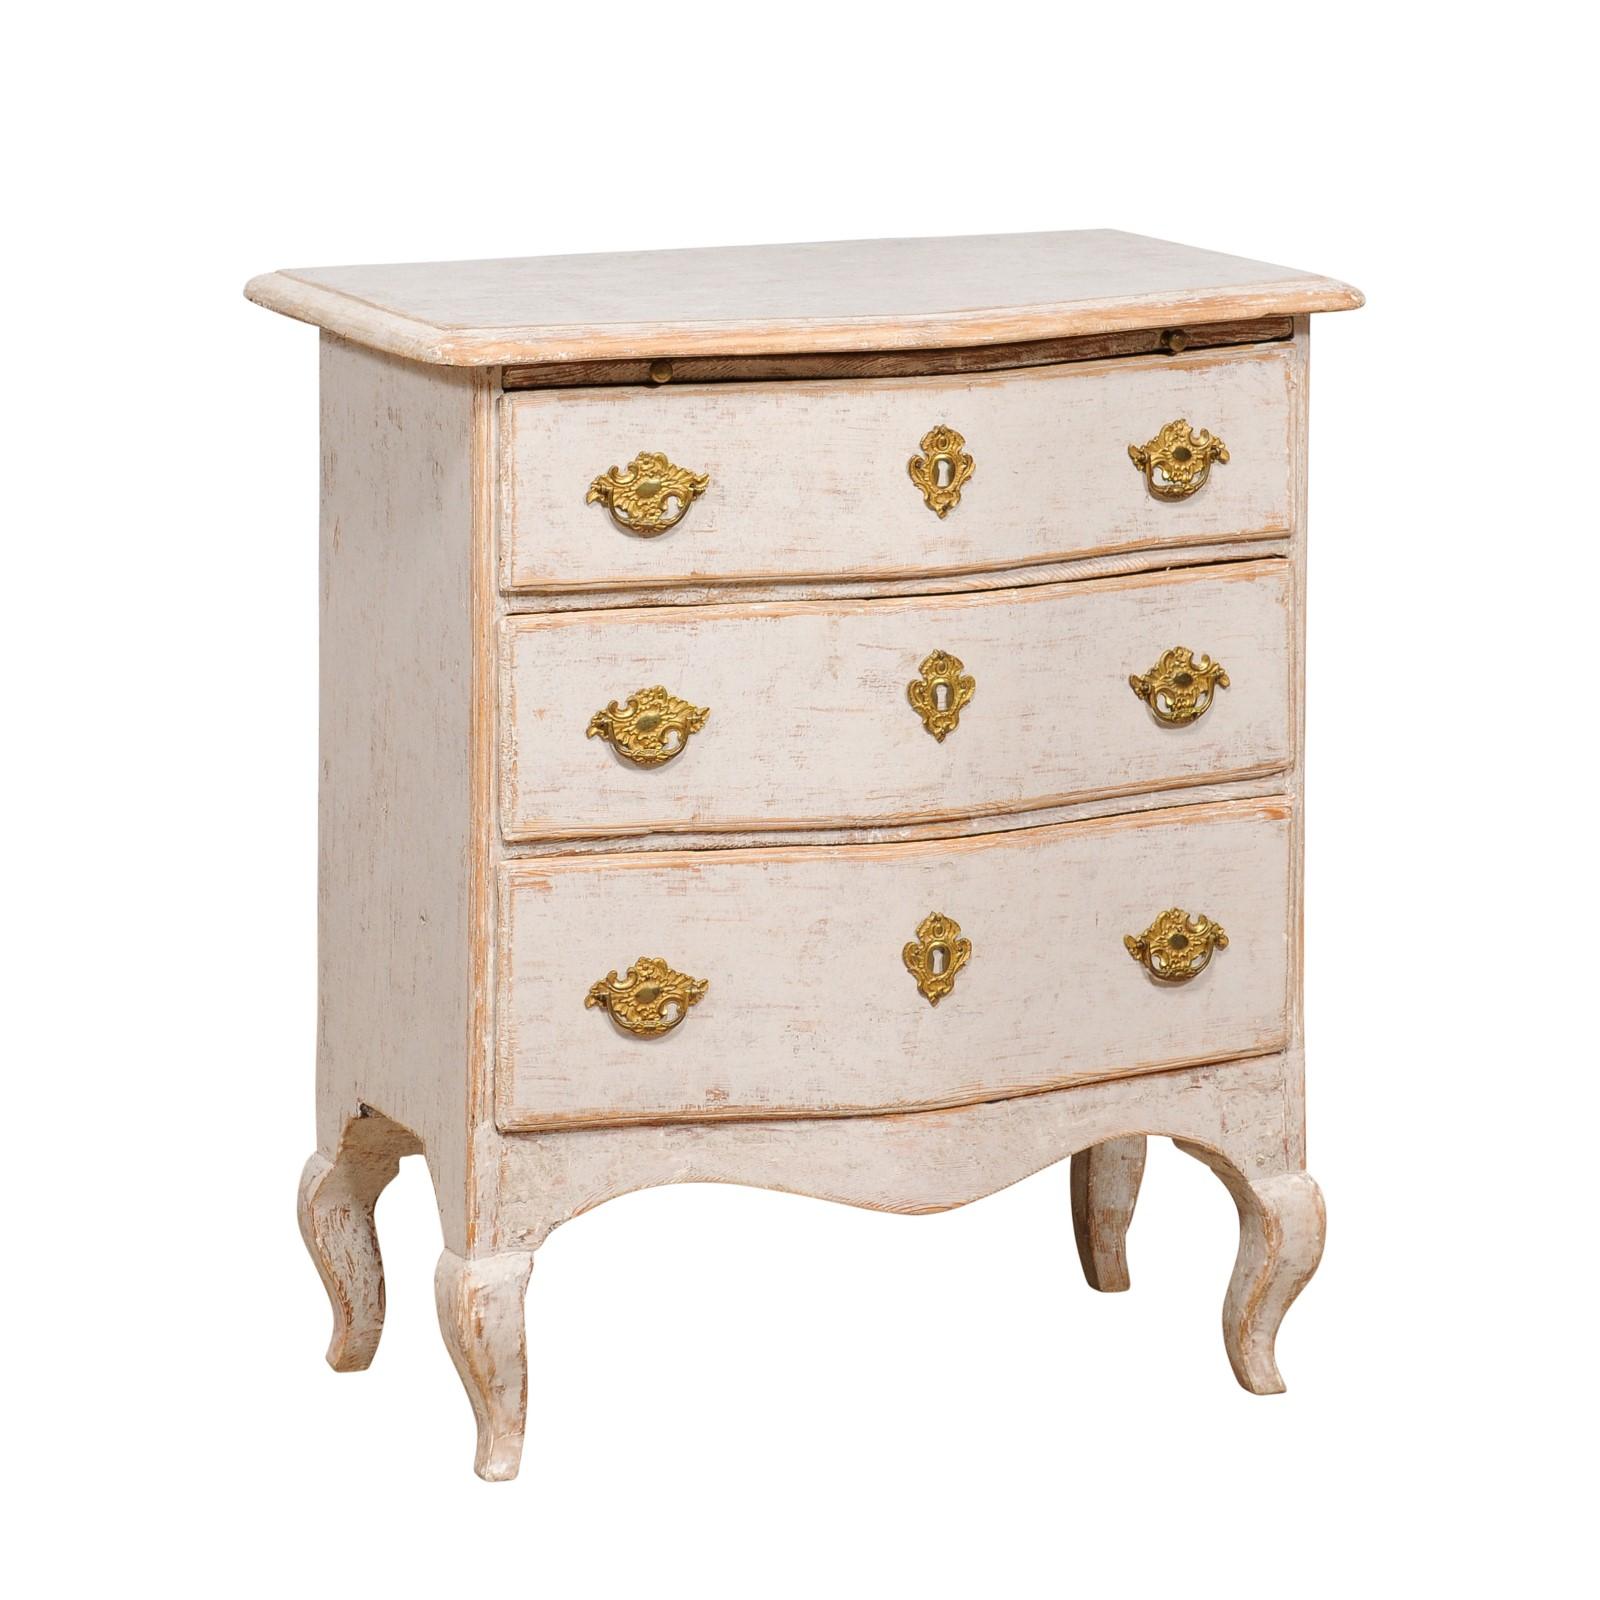 A Swedish Rococo period neutral light grey painted chest from circa 1760 with three drawers topped by a discreet pull-out, serpentine front, cabriole legs and ormolu hardware. Emanating the grace and nuanced elegance of the Swedish Rococo period,